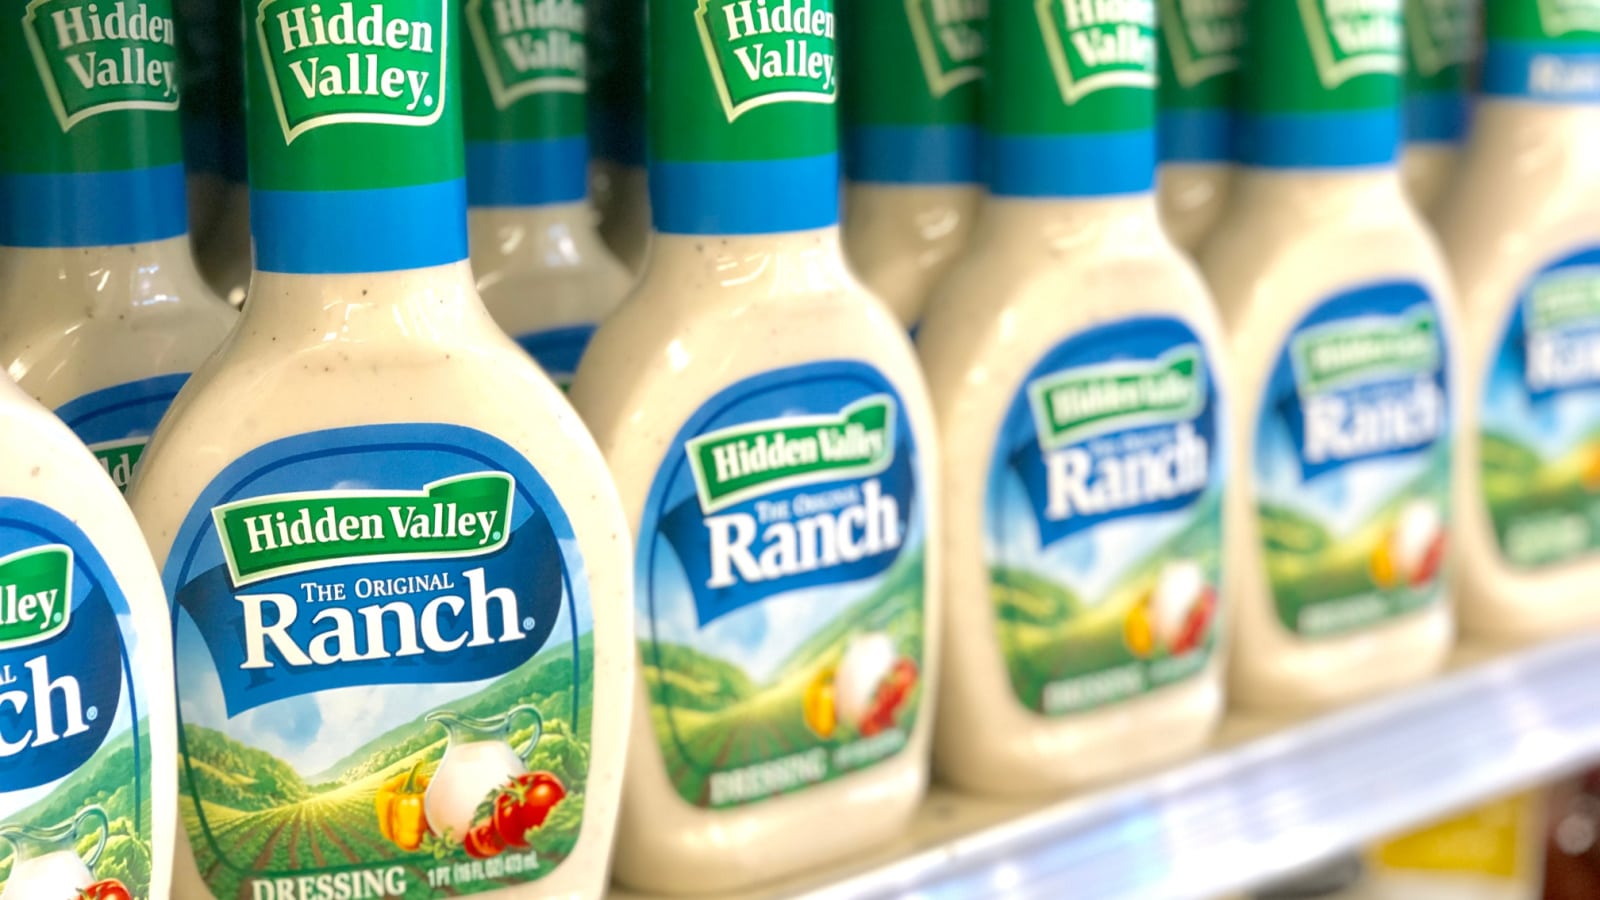 Black Mountain, NC / USA - May 21, 2019: This is a color photo of 16 oz. size bottles of Hidden Valley Ranch dressing on the shelf at a local grocery store.